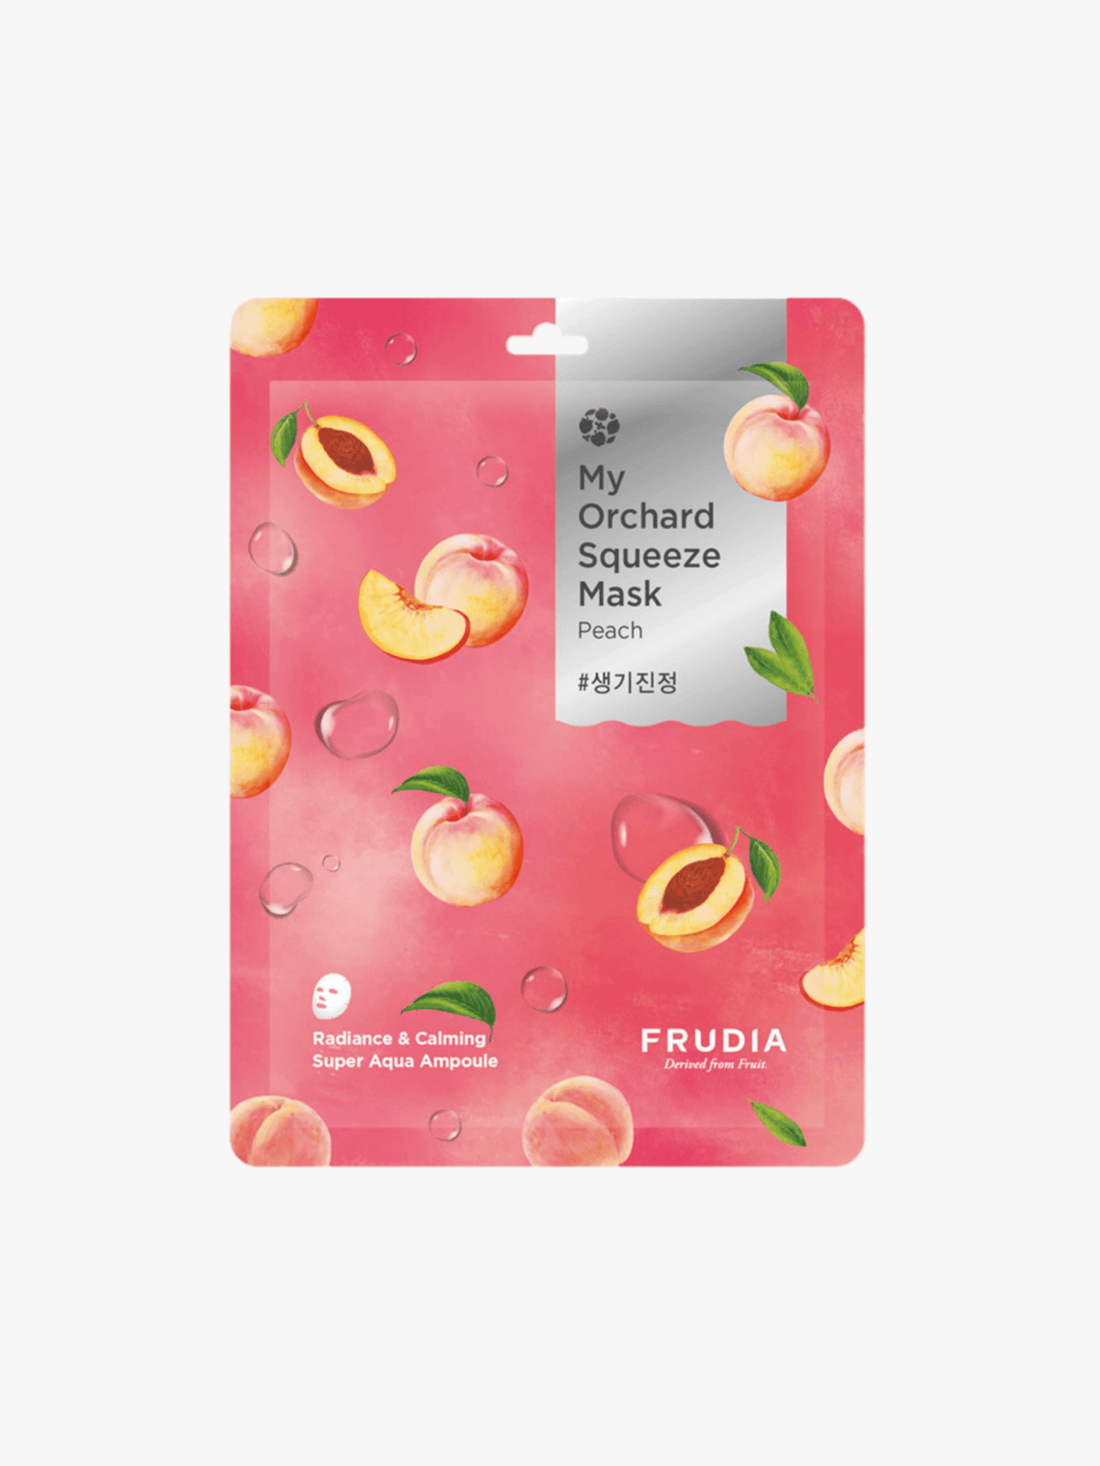 FRUDIA - Masque - My Orchard Squeeze Mask Peach